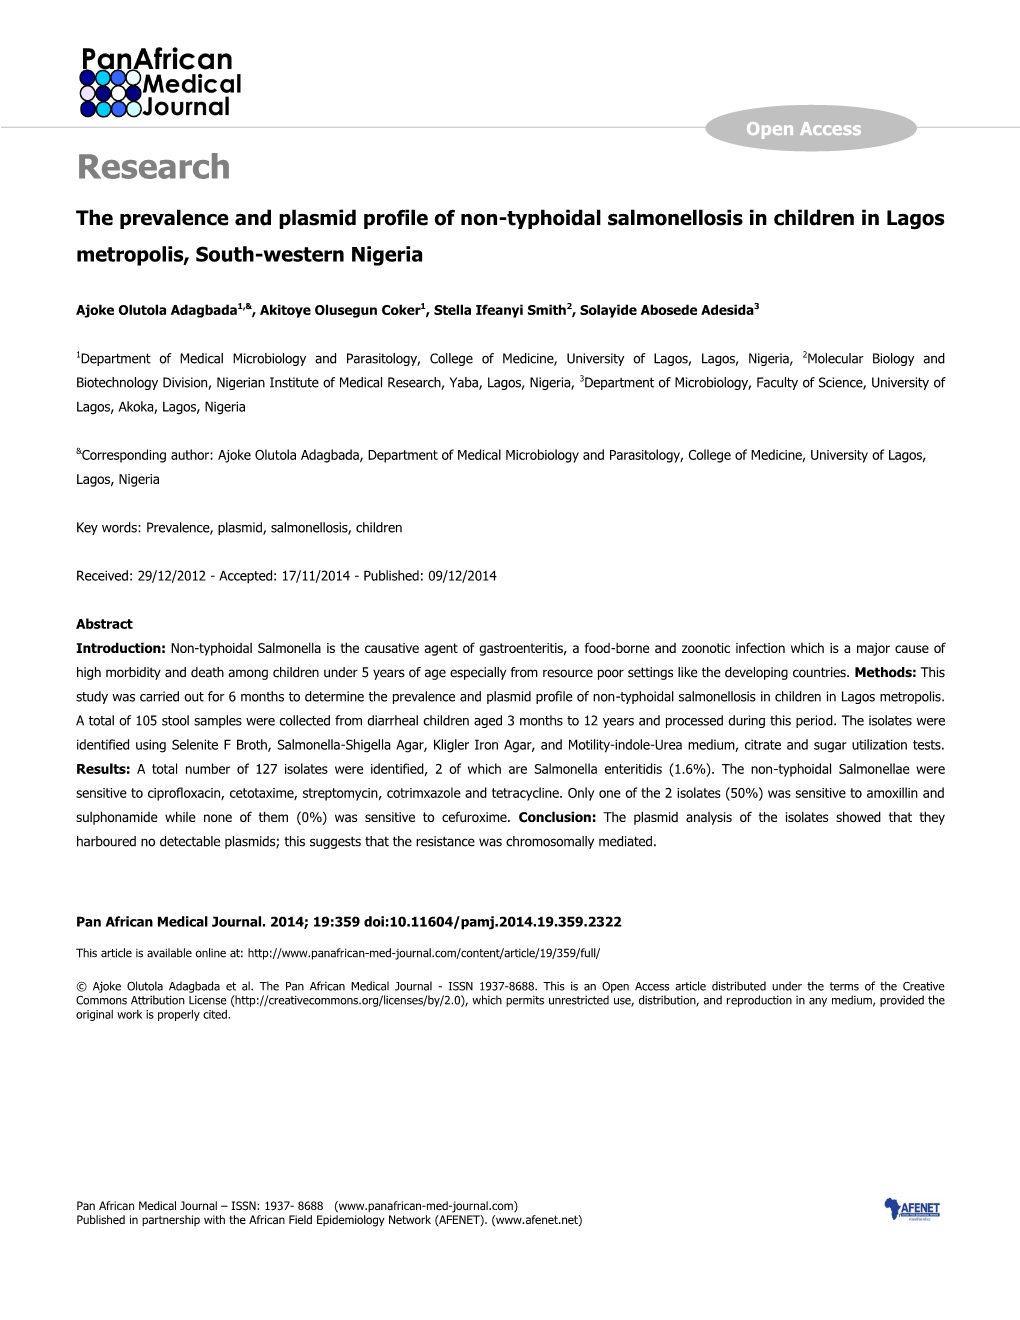 The Prevalence and Plasmid Profile of Non-Typhoidal Salmonellosis in Children in Lagos Metropolis, South-Western Nigeria